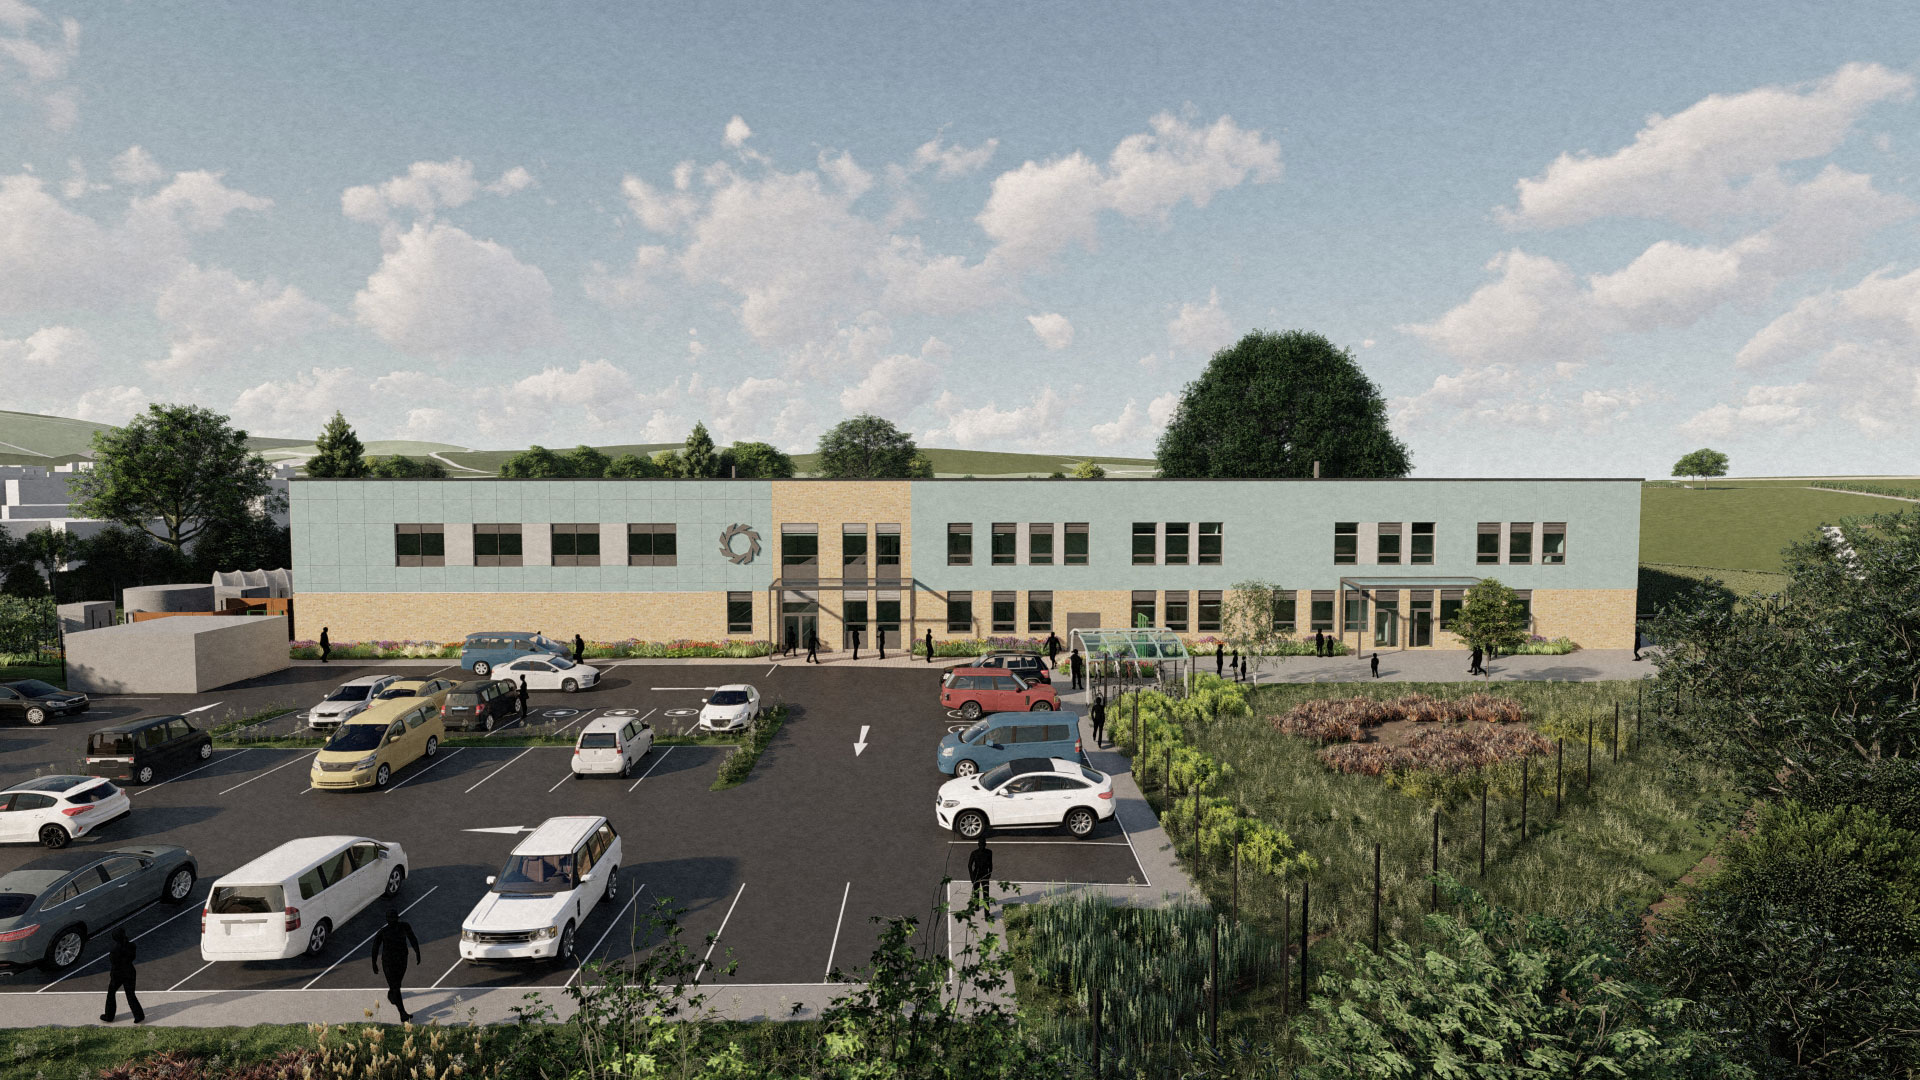 artist impression of the front of the new school